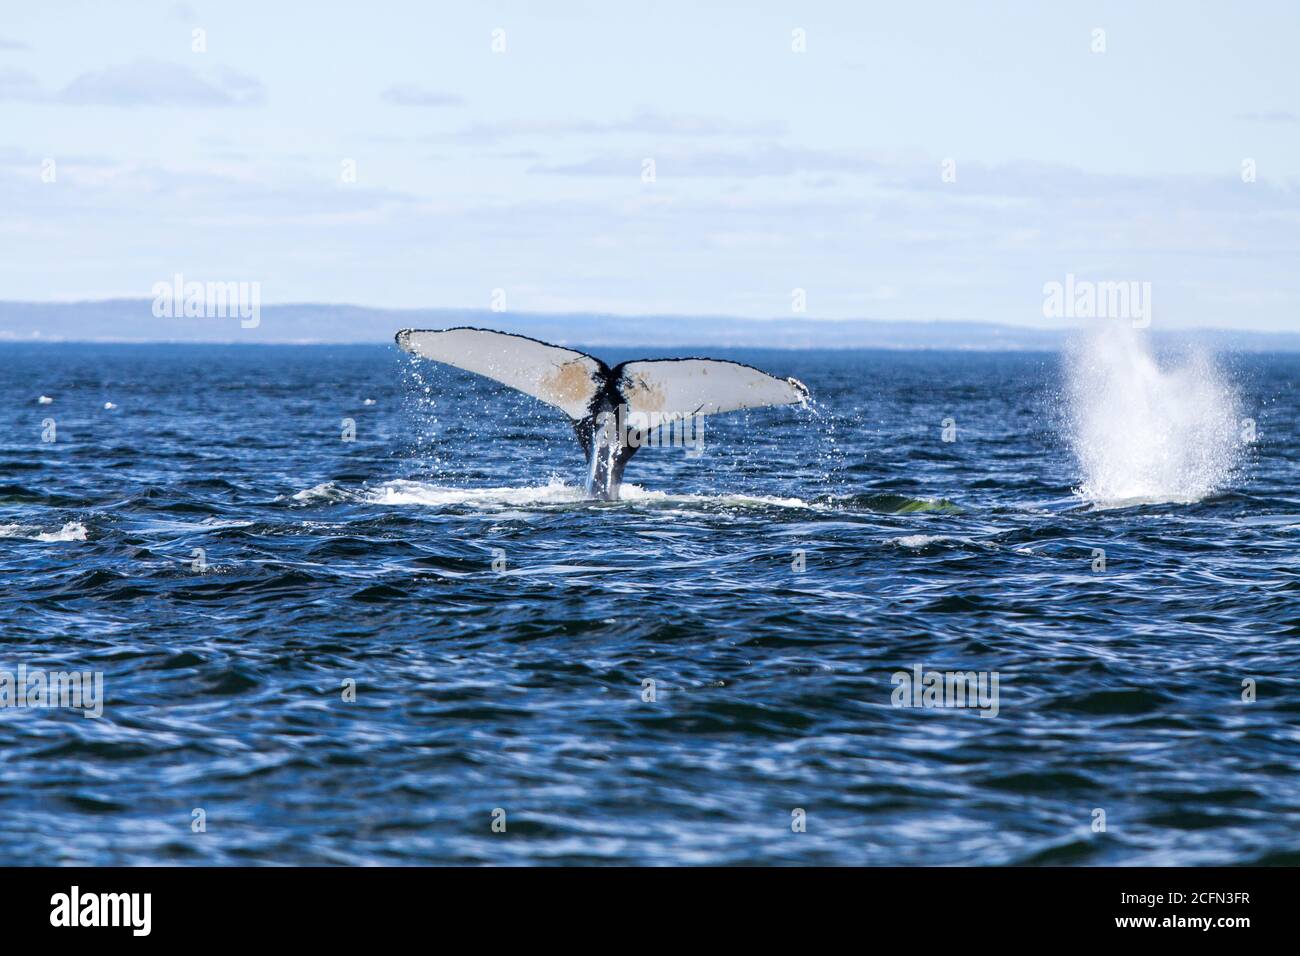 Whale watching In Tadoussac, Quebec, Canada on Saint Lawrence river Stock Photo